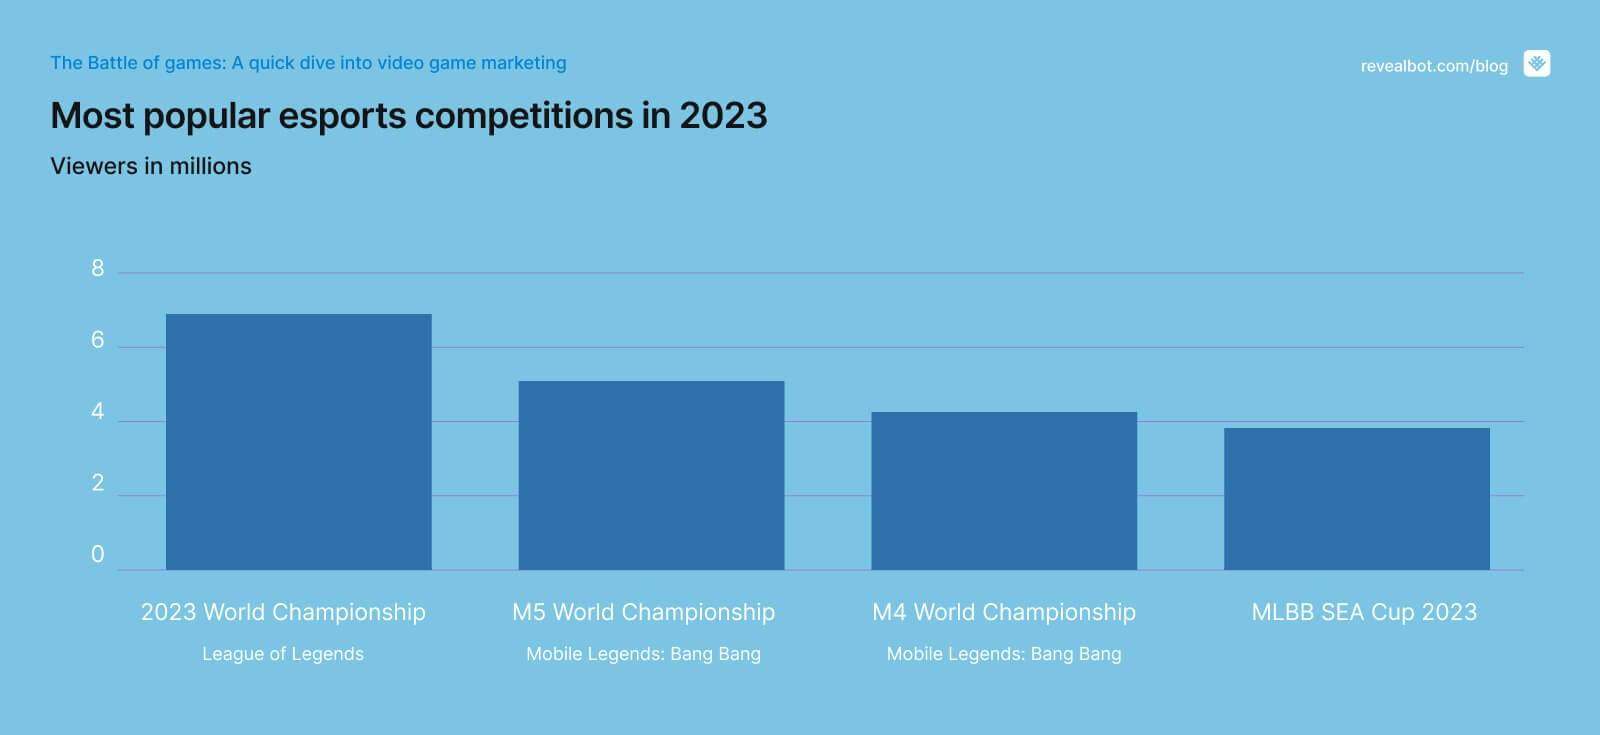 Most popular esports competitions 2023